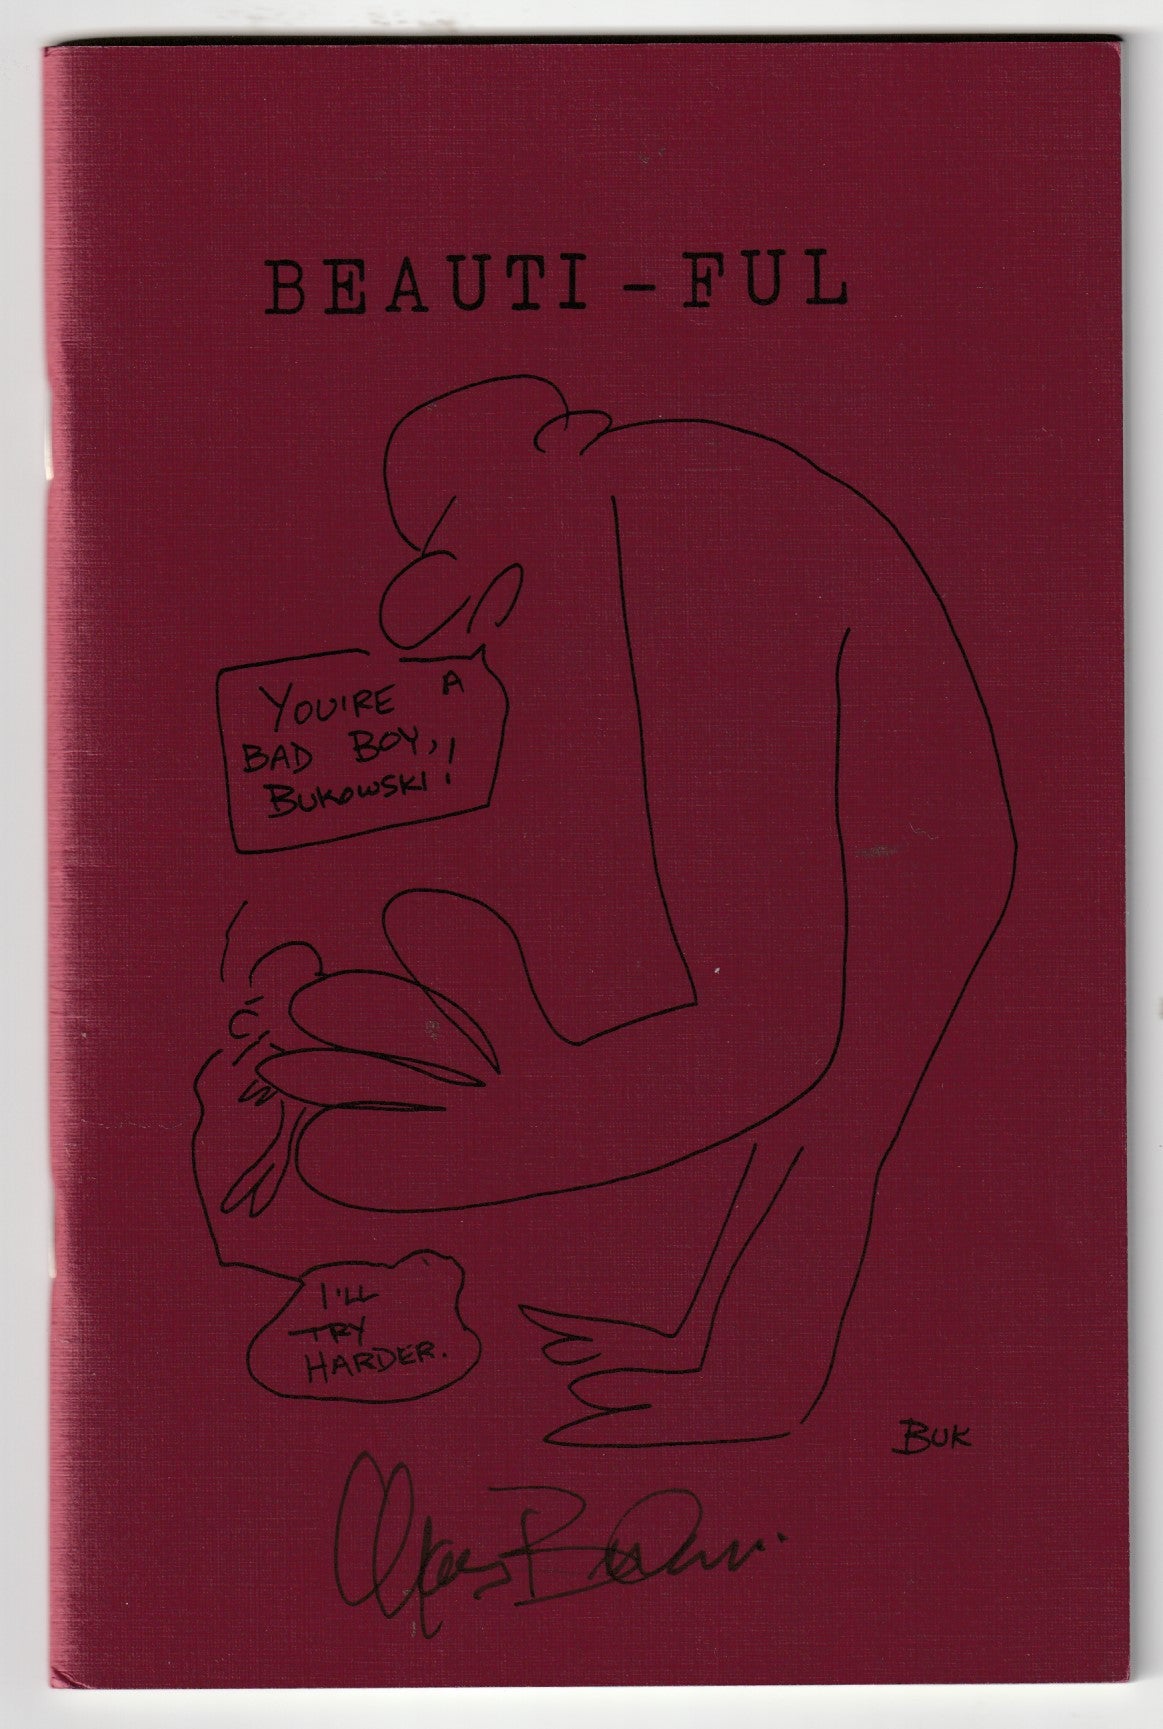 BEAUTI-FUL, Wormwood Review 110-111: Deluxe Edition Signed by Bukowski (#21/75)